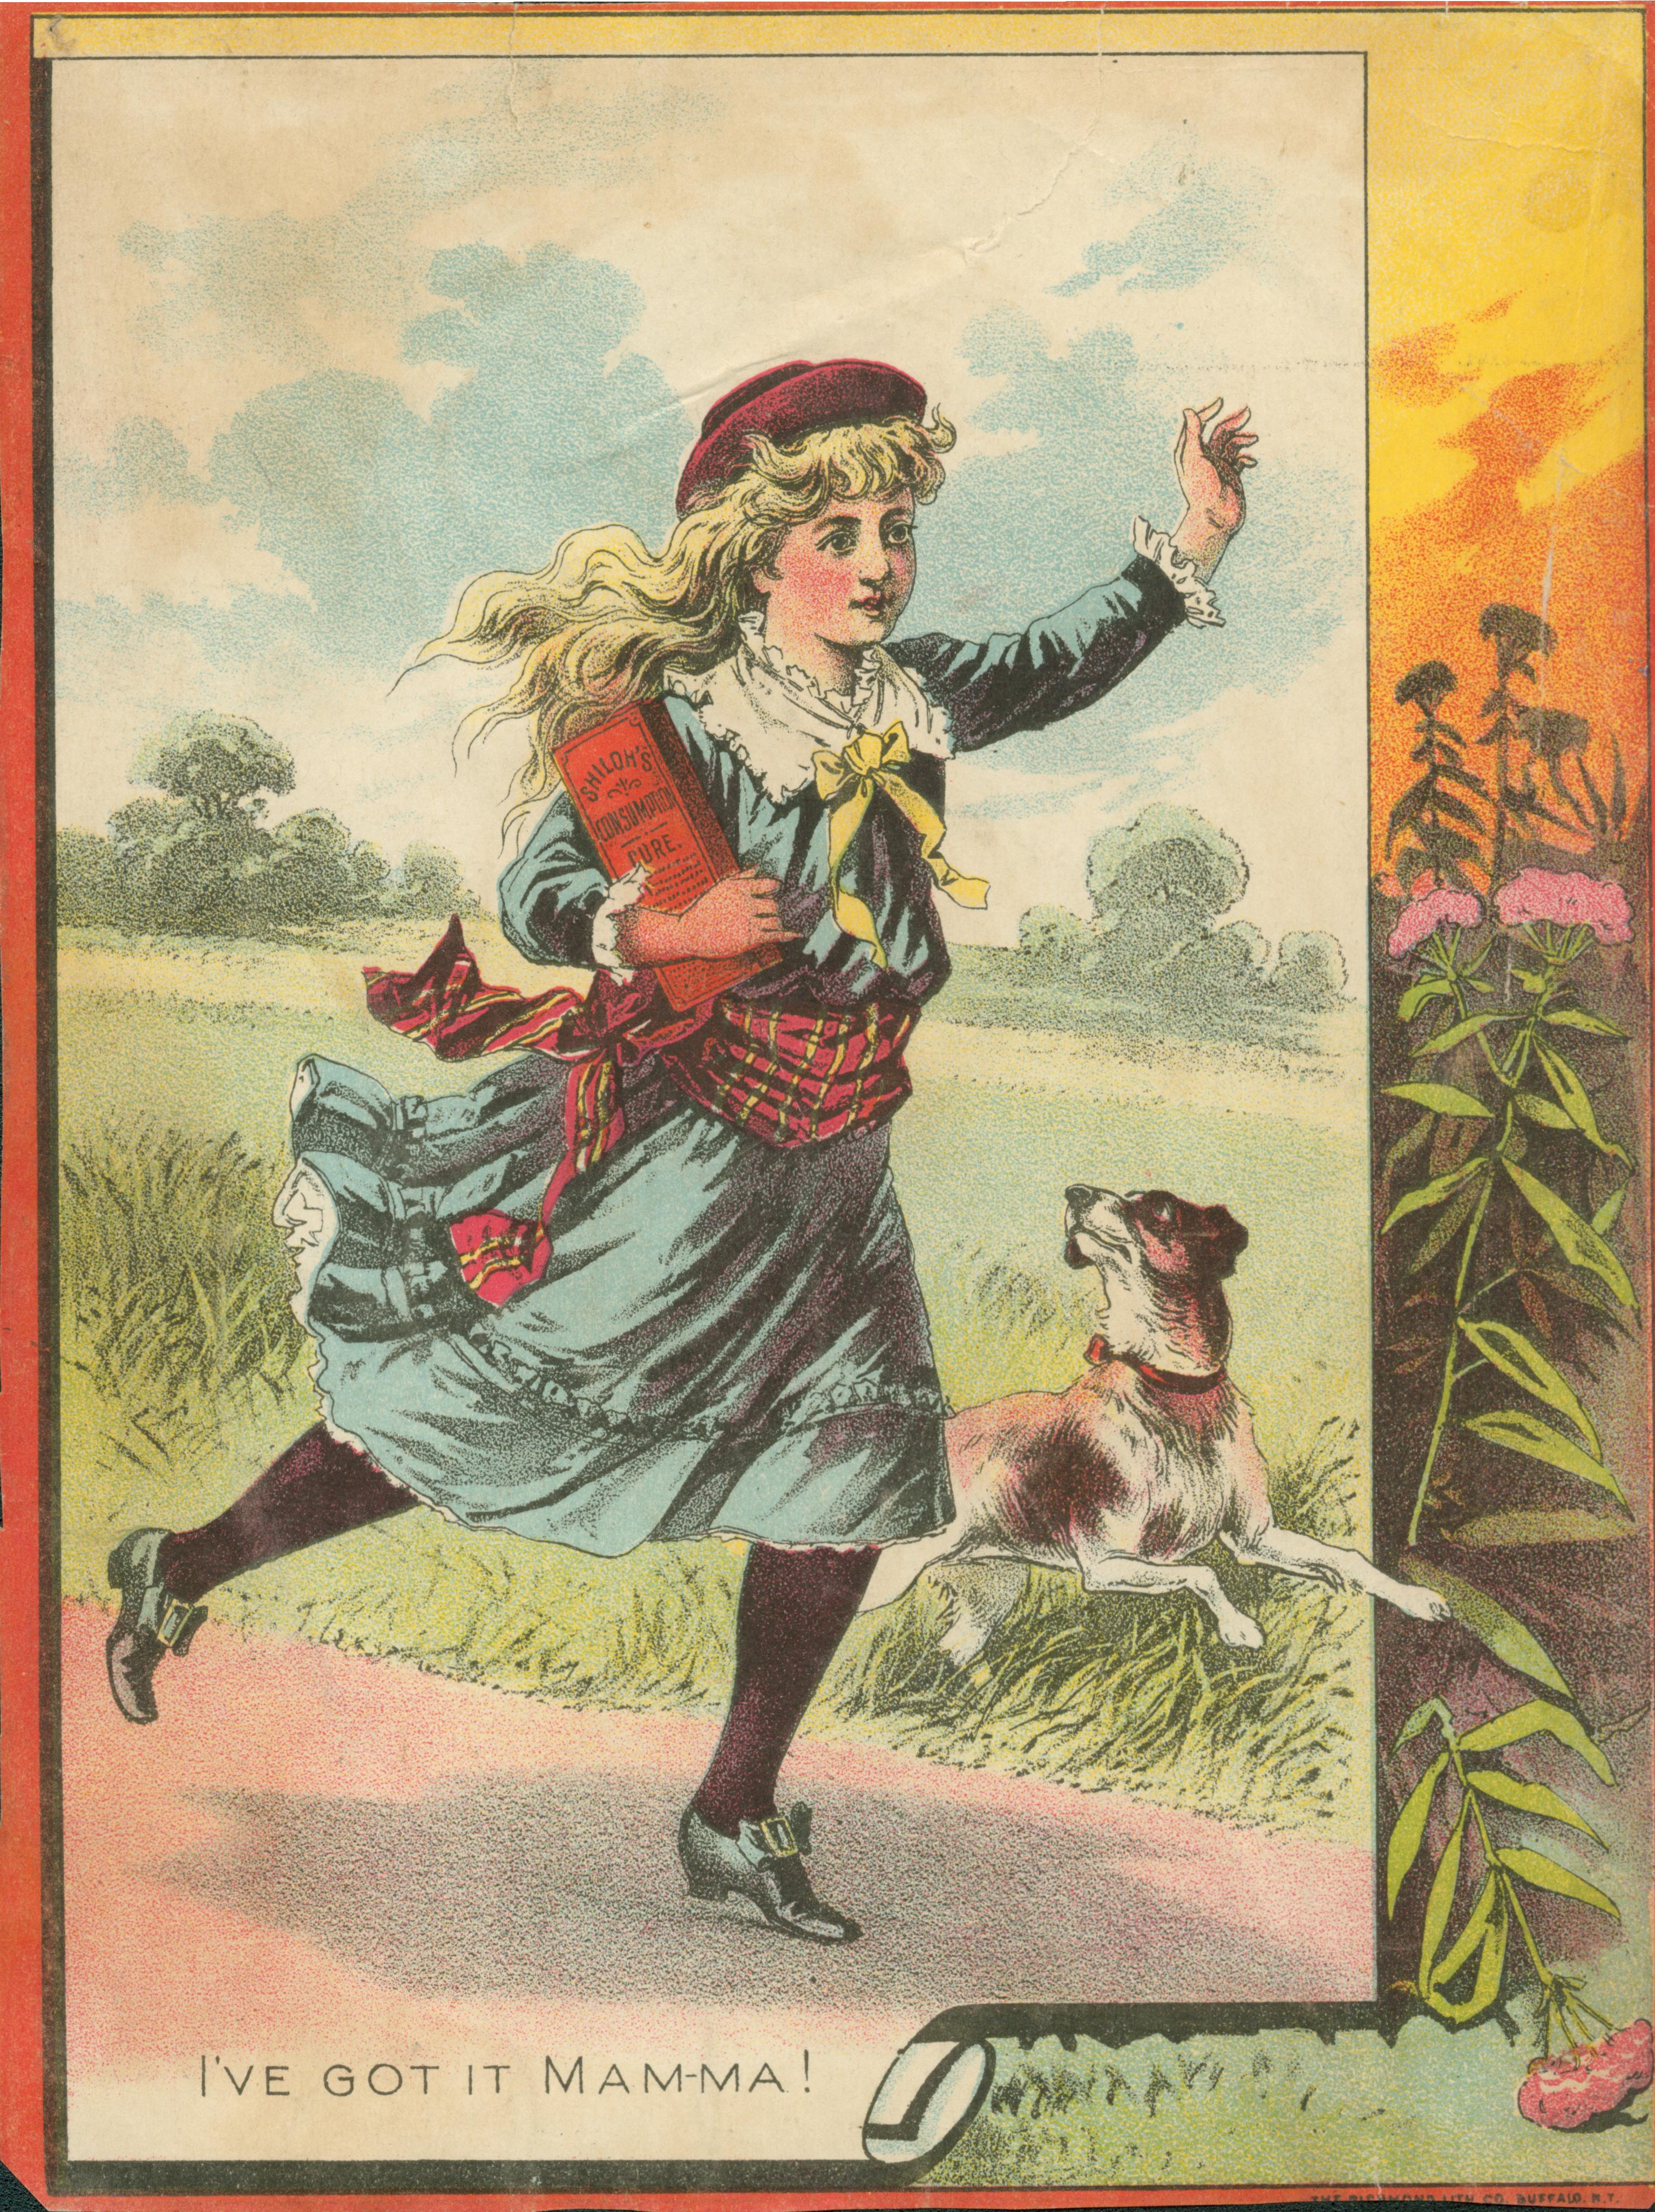 This trade card shows a girl and a dog running down a path. The girl is carrying a box of medicine and calling 'I got it Mama!'